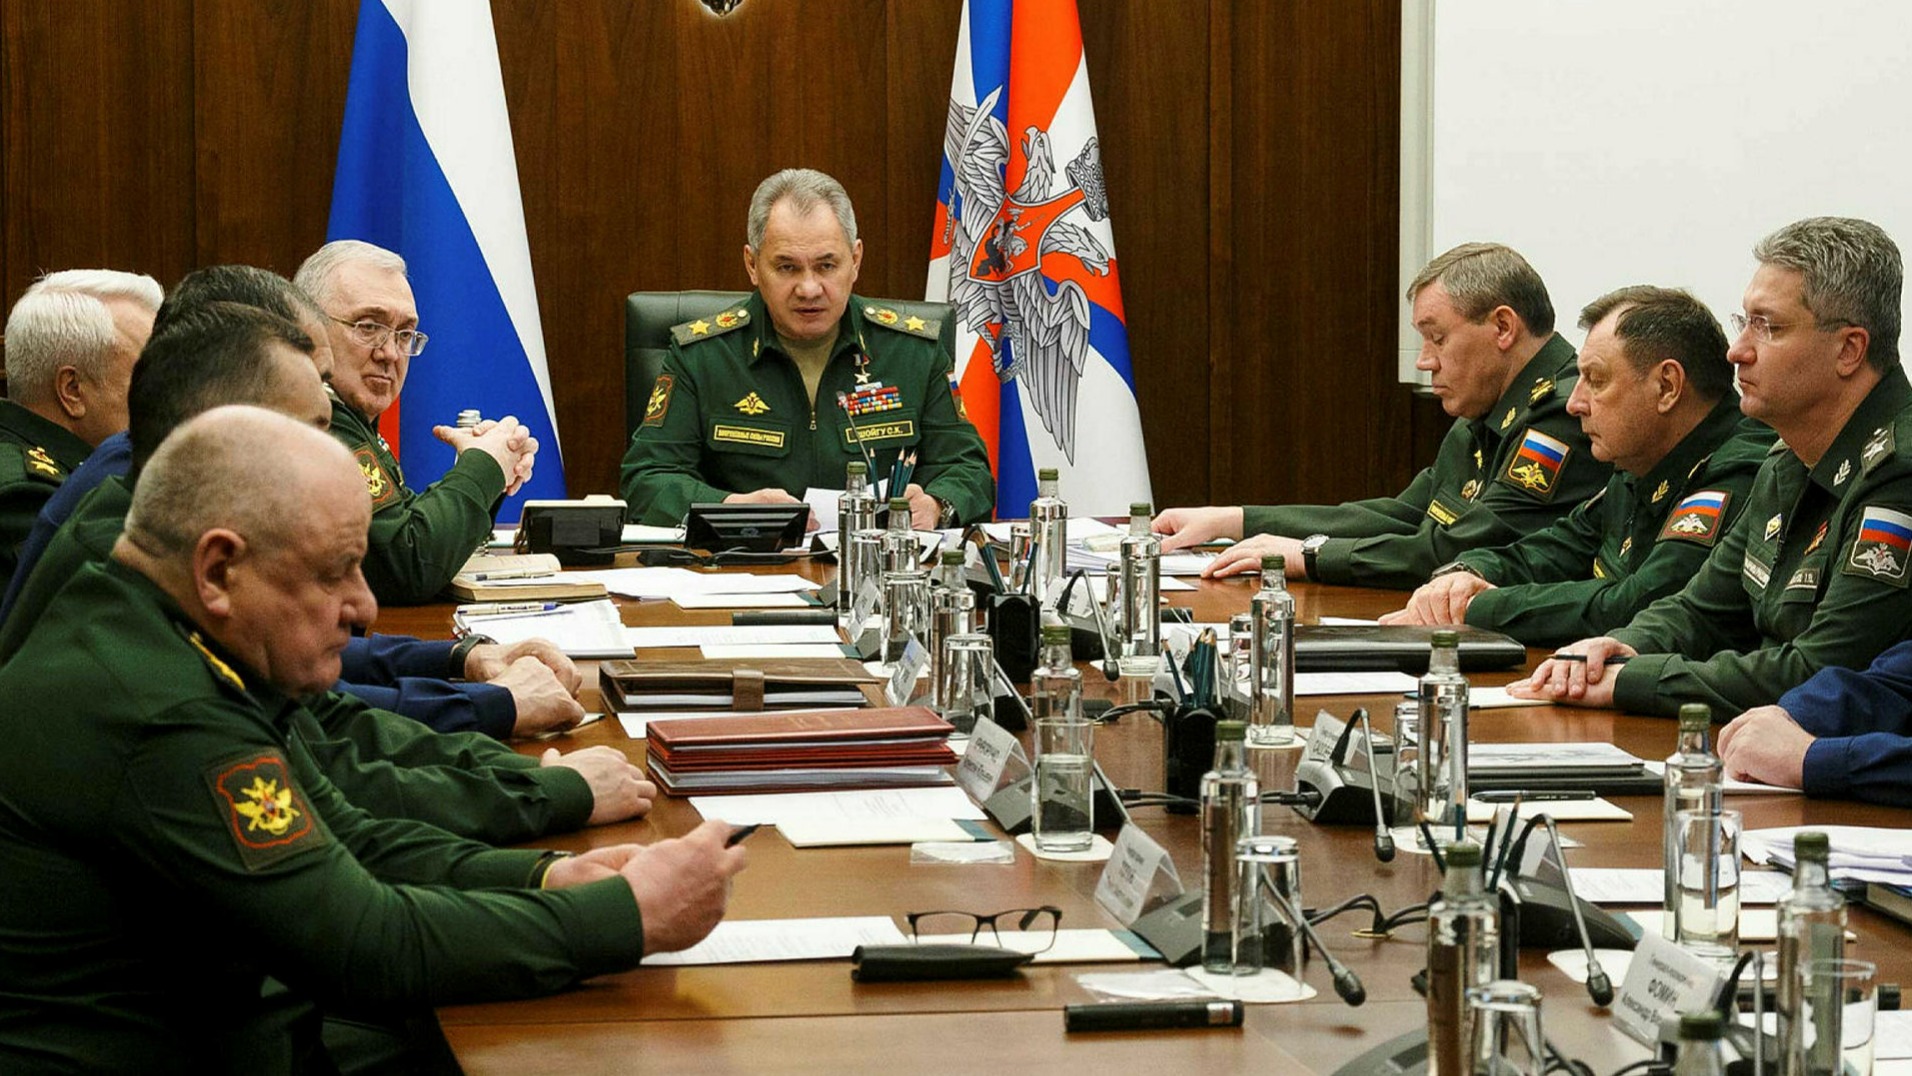 Russian defence minister's fleeting reappearance adds to mystery | Financial Times